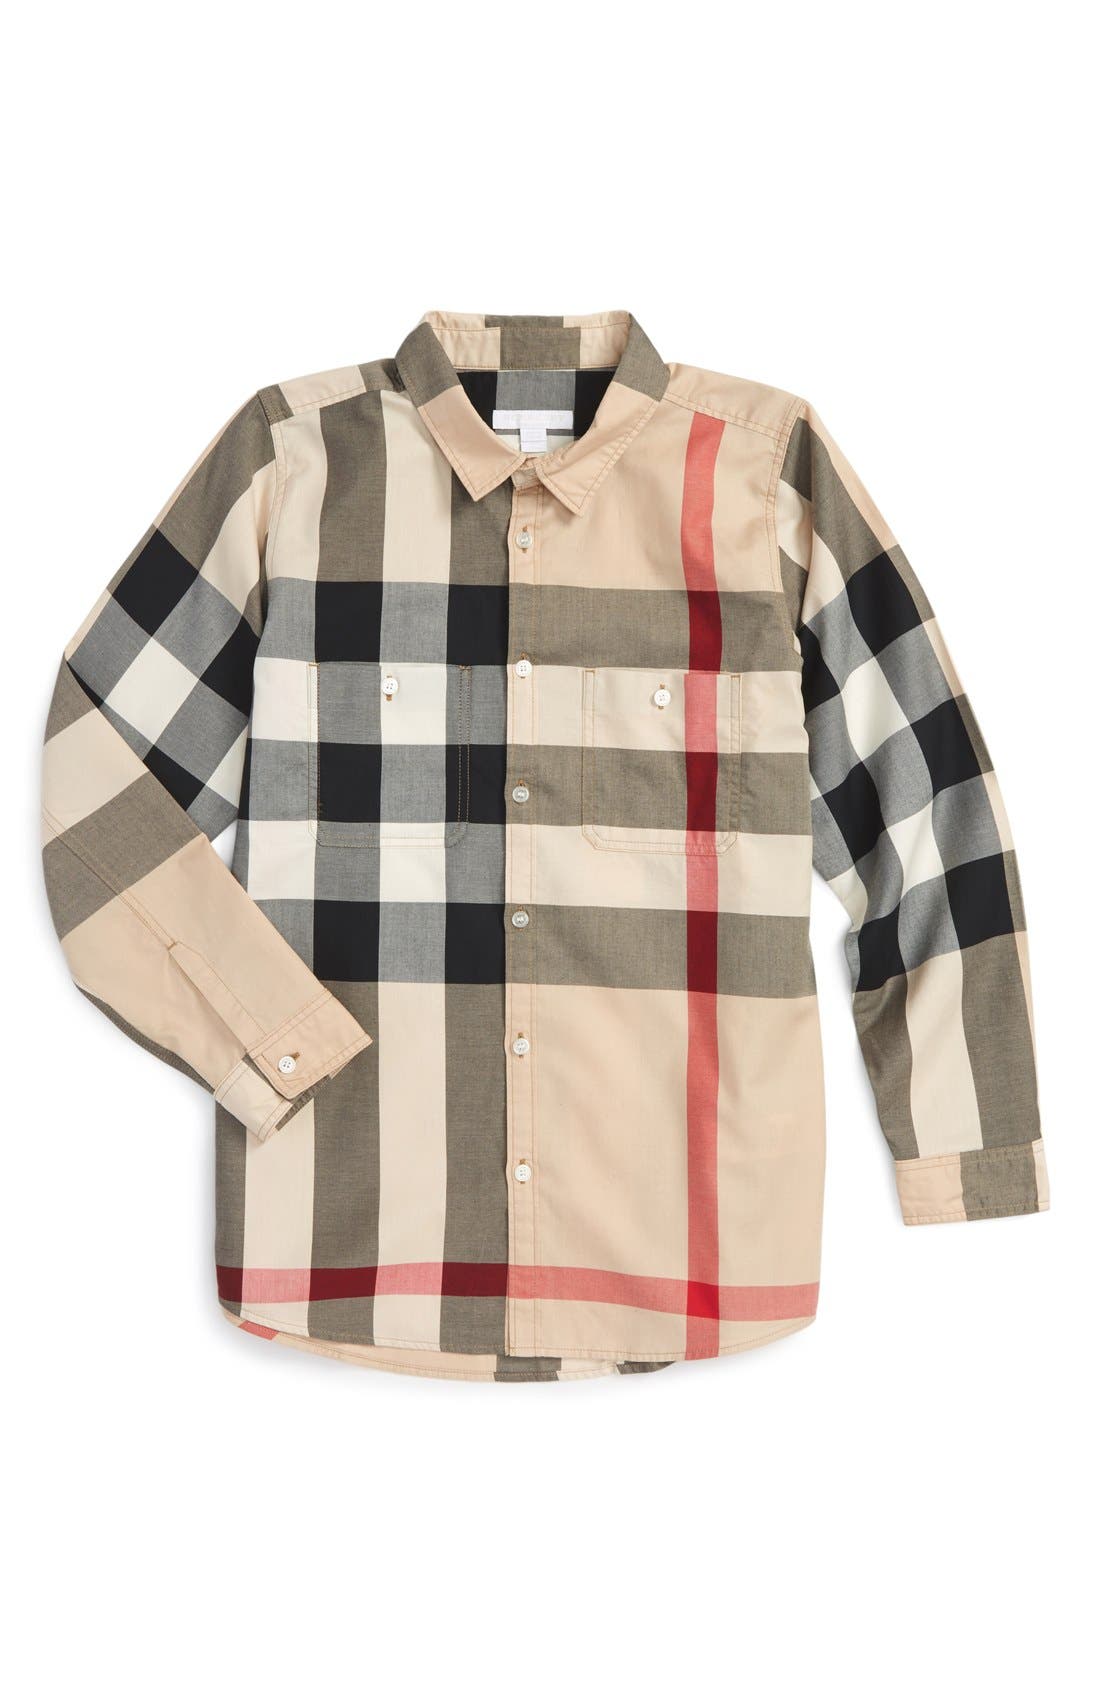 burberry baby boy outfit